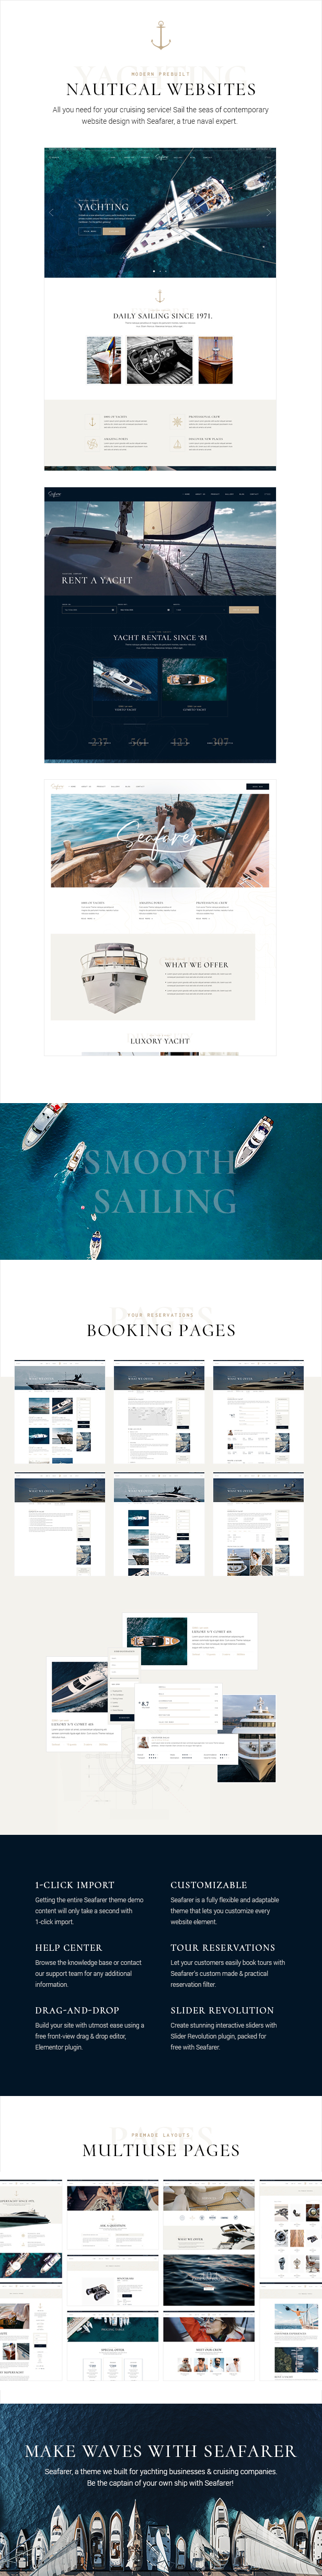 Seafarer - Yacht and Boat Rental Theme - 2